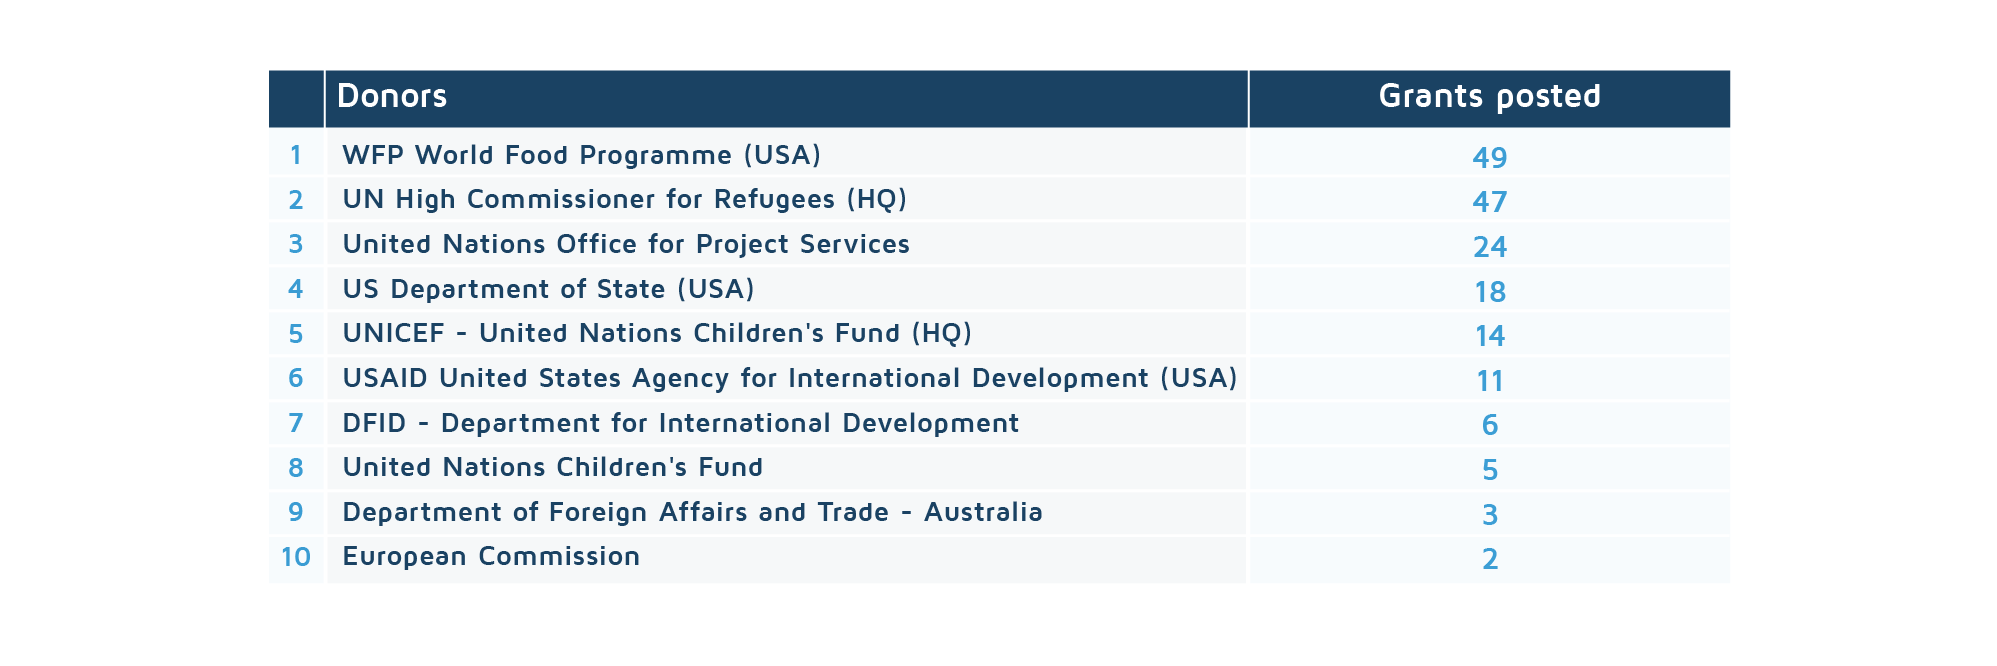 TOP-10 donors by posted grants notices, humanitarian sector 2019